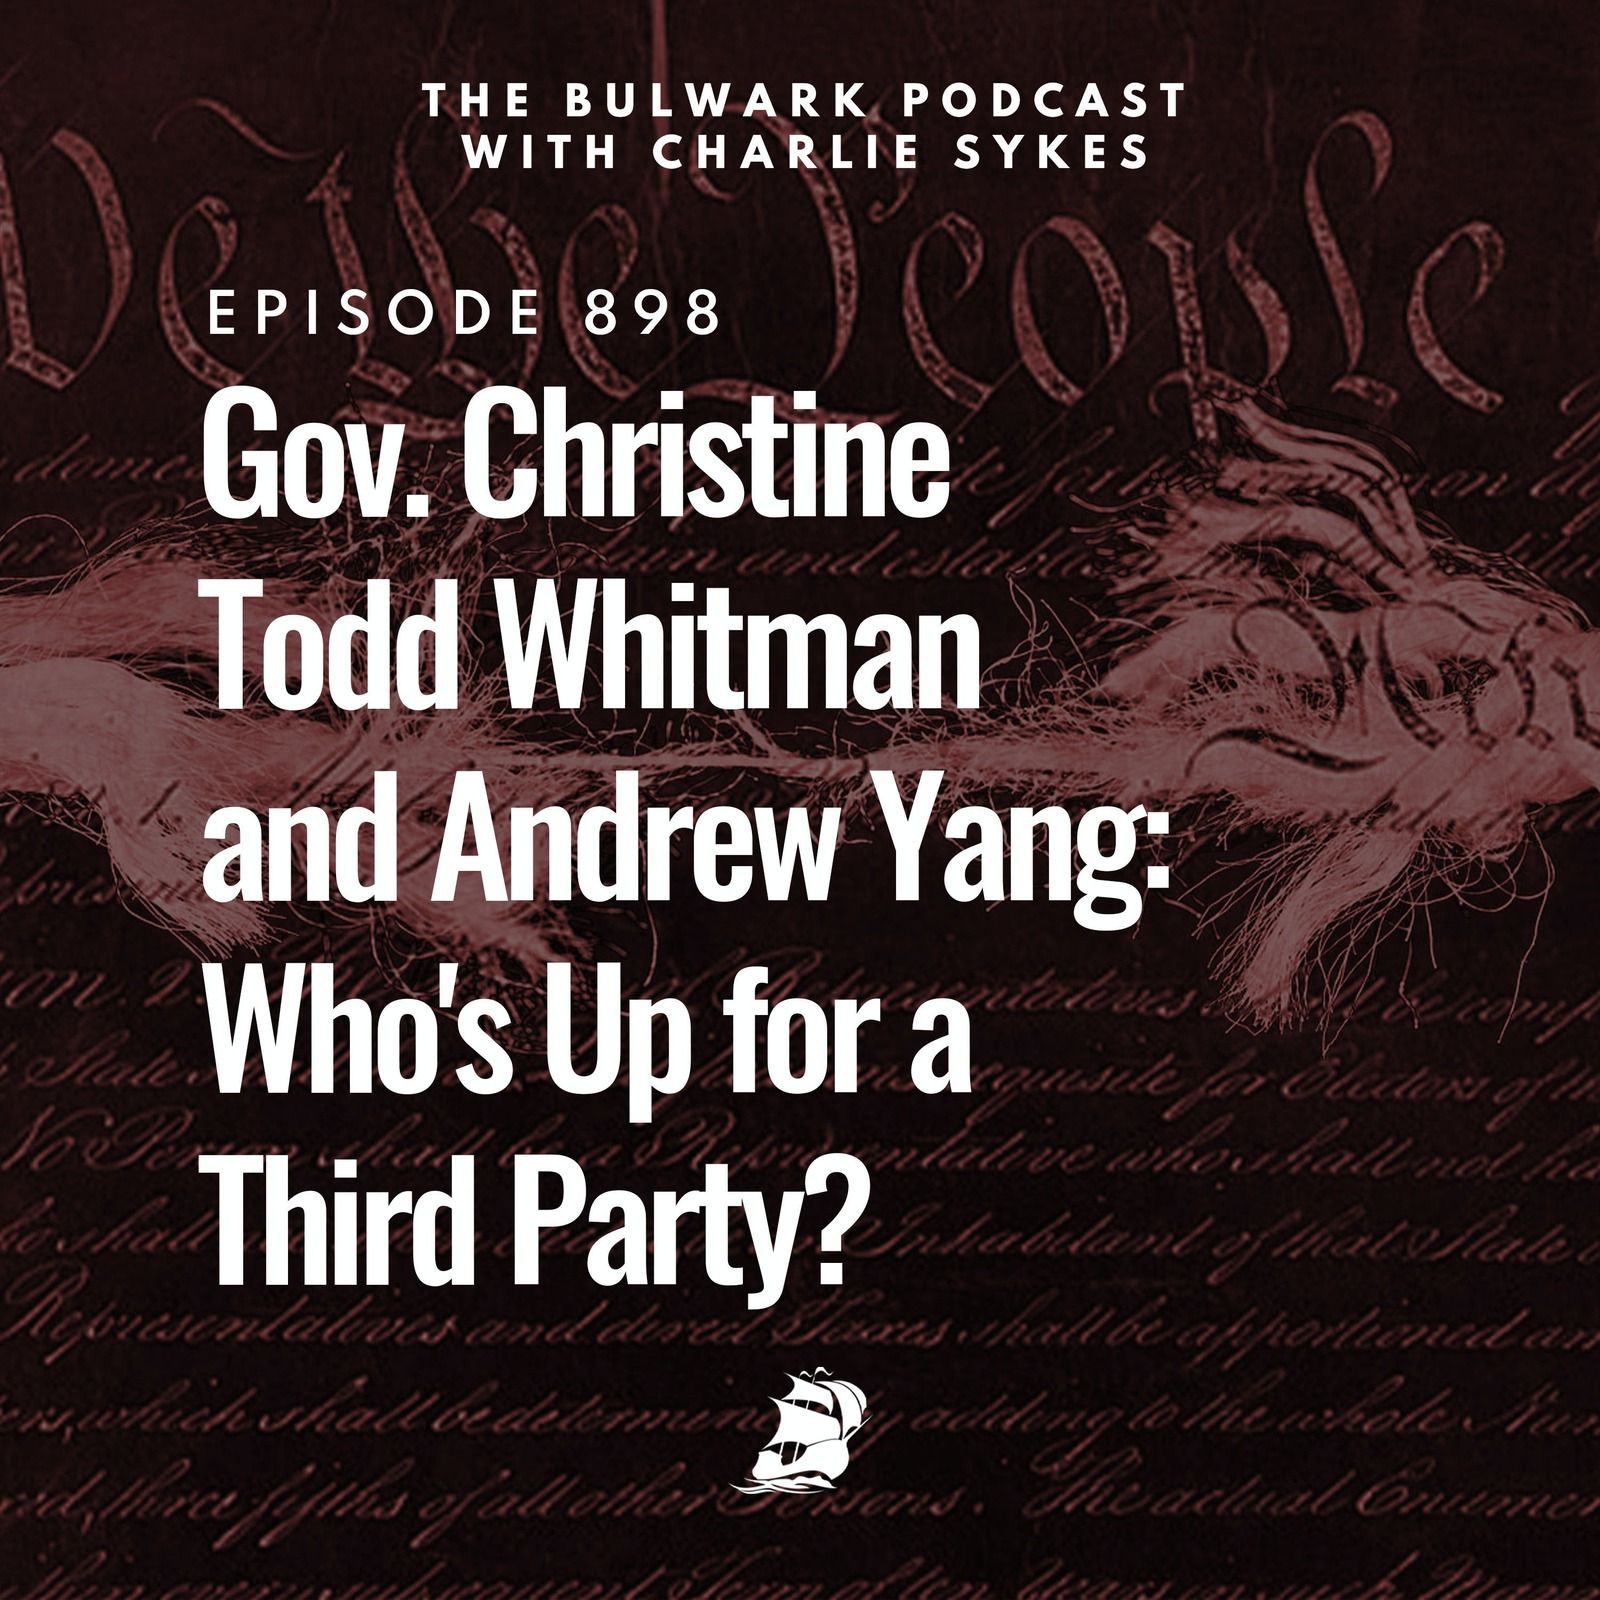 Gov. Christine Todd Whitman and Andrew Yang: Who's up for a Third Party?